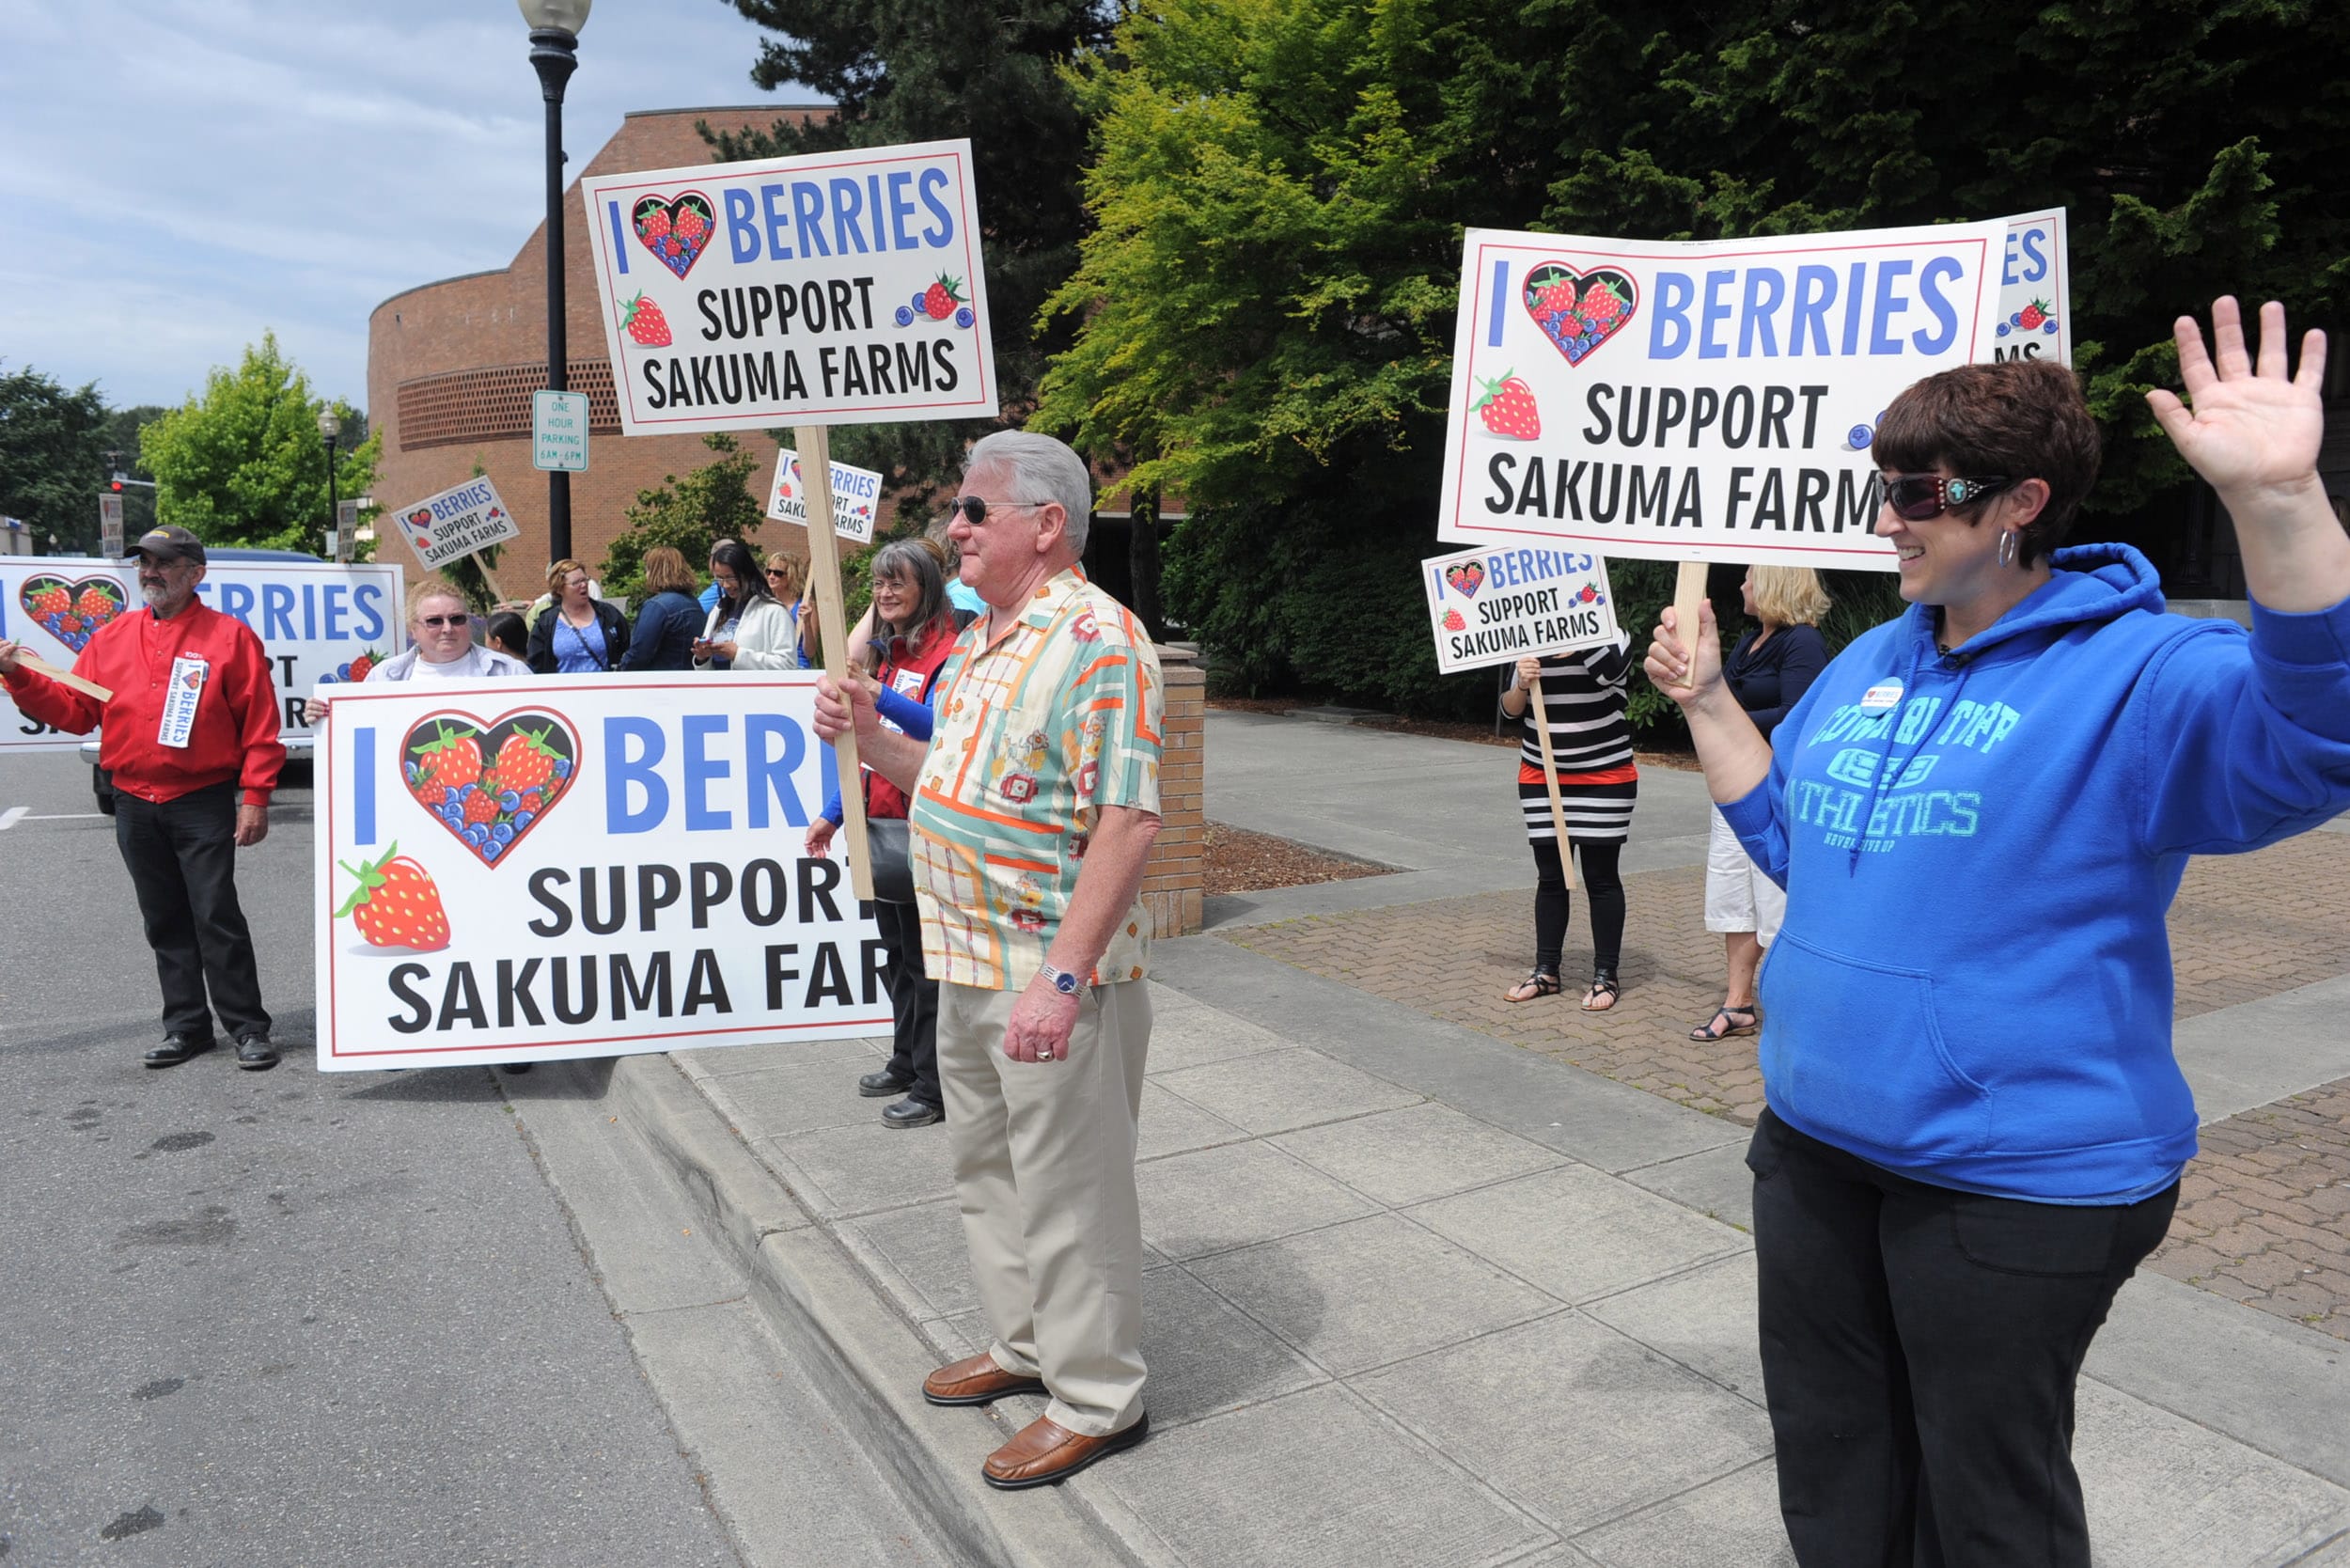 Dozens of demonstrators stand on Kincaid Street in Mount Vernon on Thursday to show support for Sakuma Bros. Farms during a rally in front of the Skagit County courthouse. The rally preceded a court hearing that decided the Sakuma Bros. Farms were obligated to provide housing to farmworkers and their families. Familias Unidas por la Justicia u2014 a labor group formed at the farm the previous season u2014 brought the case against Sakuma Bros. Farms after the farm announced earlier in the year that workers who missed more than five days last season would not be rehired and nonworking family members would not be housed. Both moves were taken as retaliation for workersu2019 participation in strikes and boycotts, attorneys for the group said.